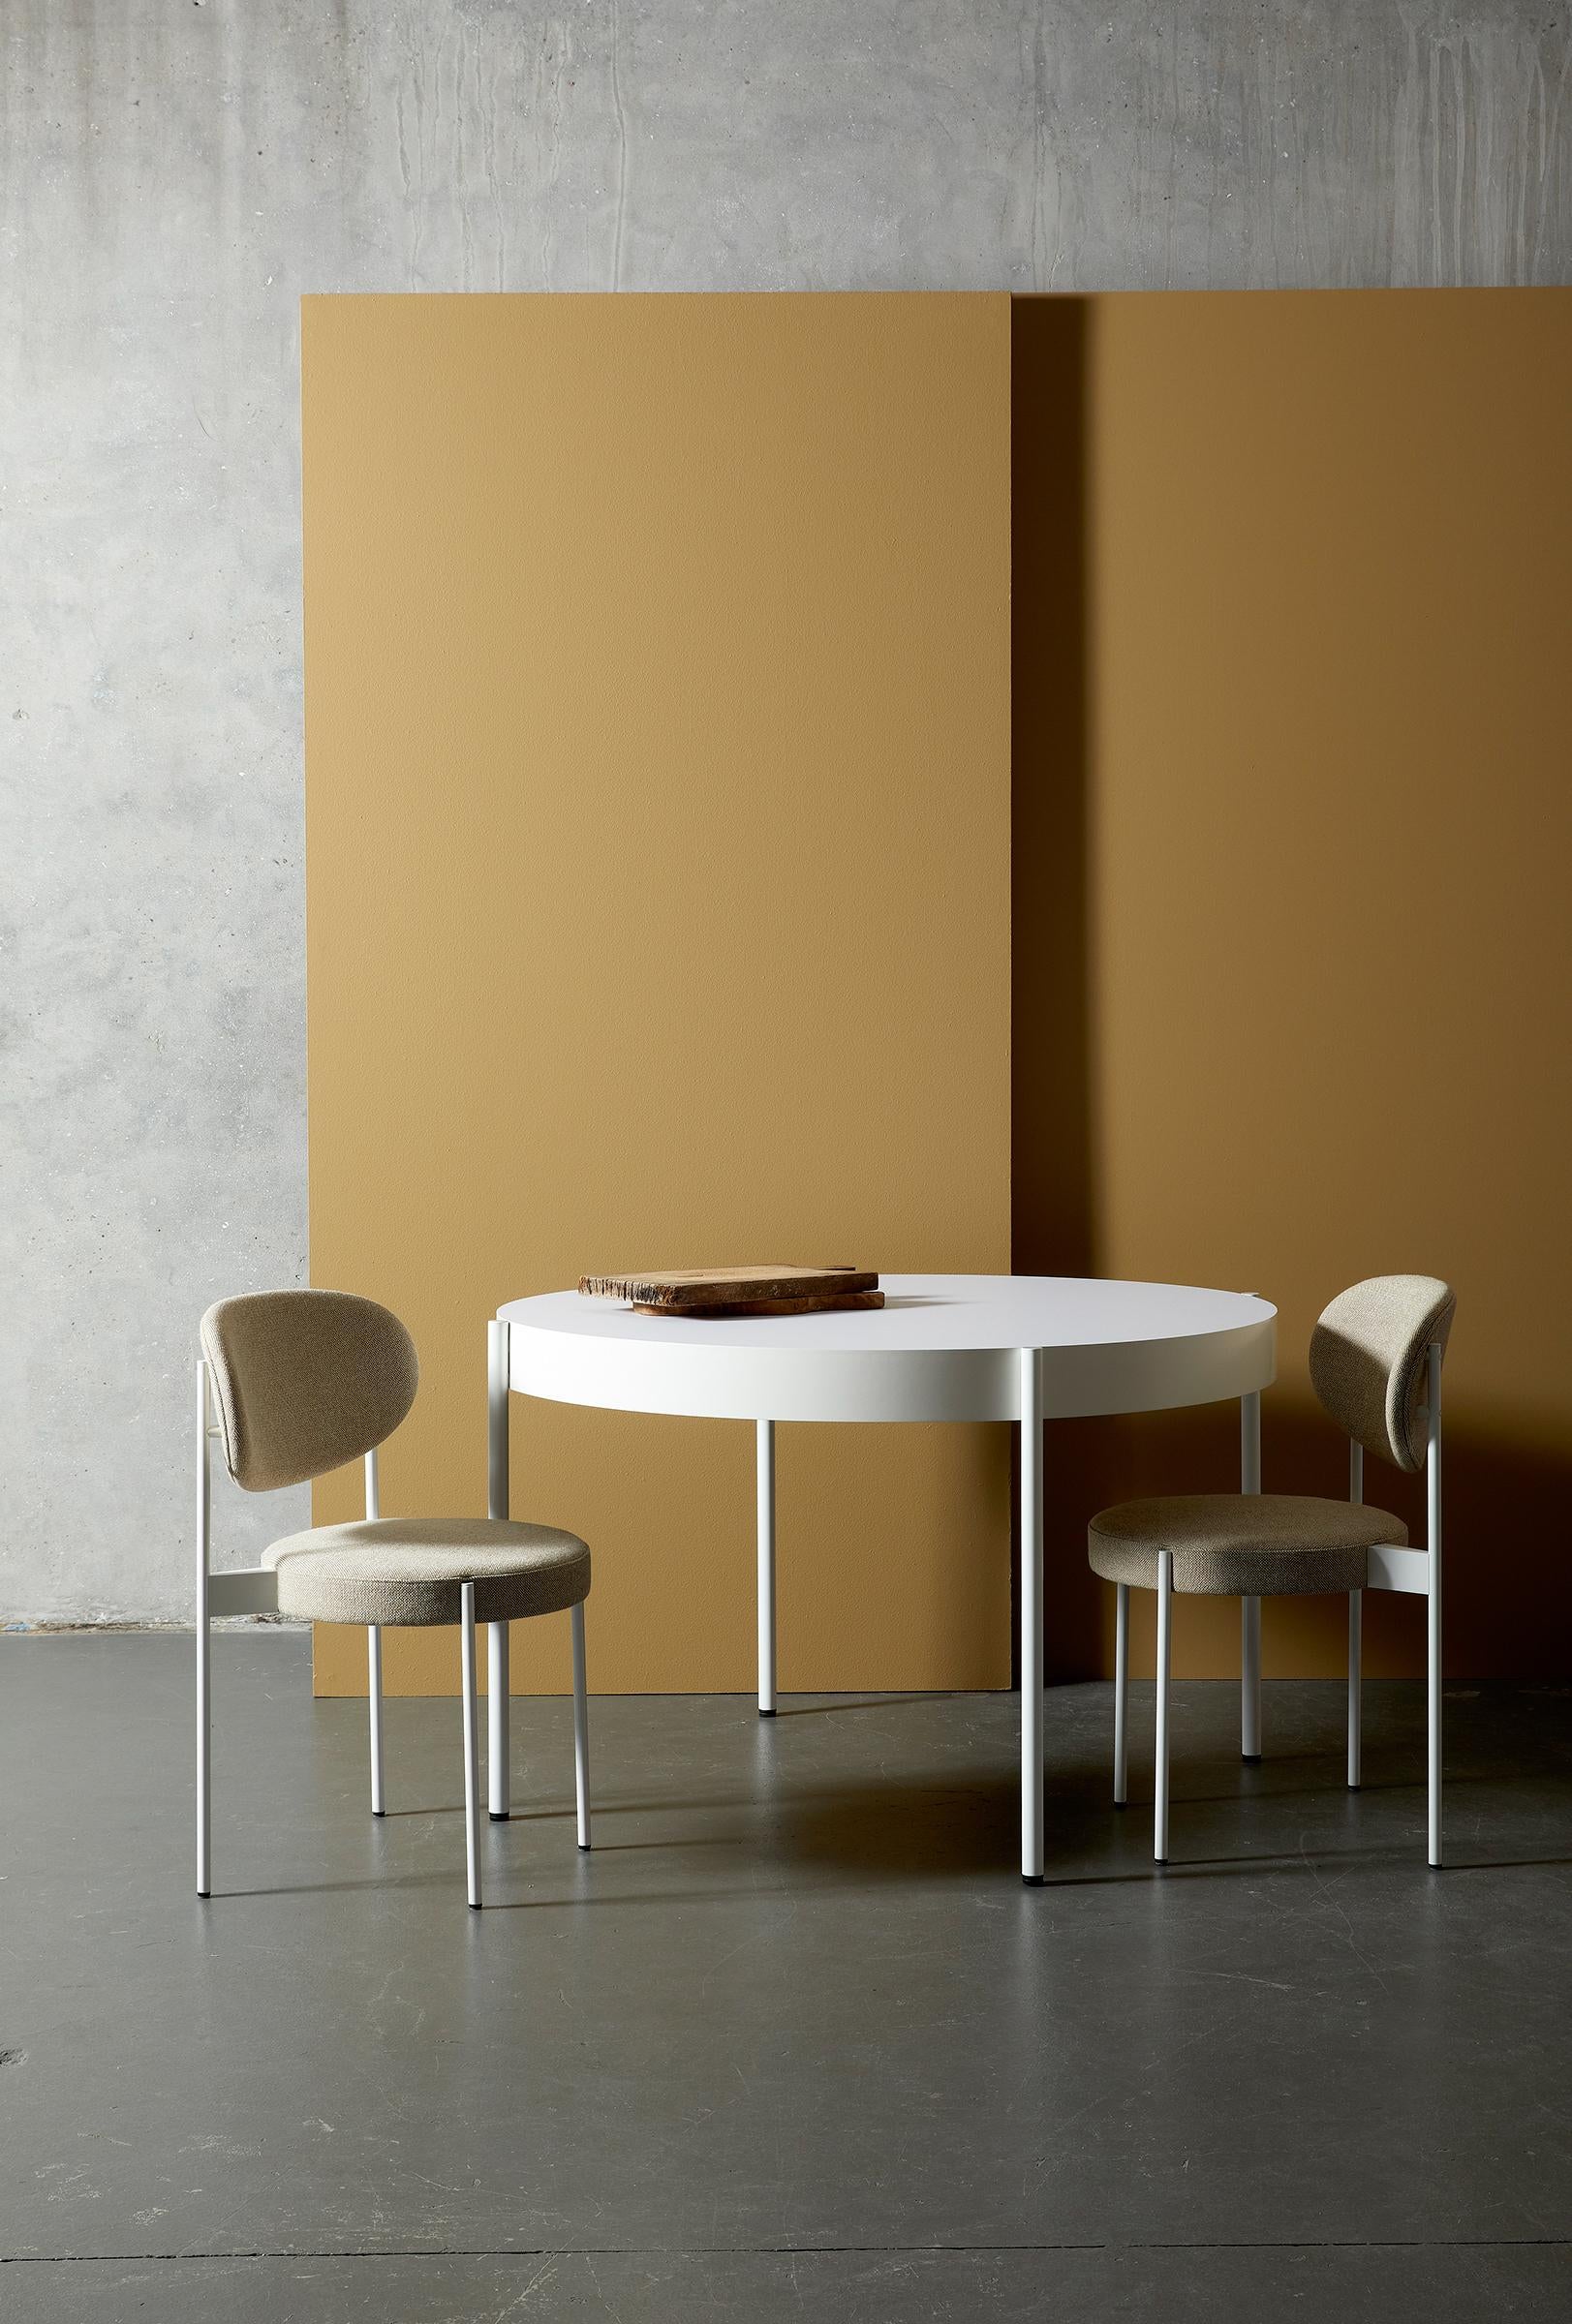 Round dining table with obvious frame. Legs placed outside the frame of the table designed by Verner Panton.

Material:
Frame: Black or white painted metal legs
White: RAL 9016 
Edge: Painted MDF
tabletop: Fenix laminate 

Color:
Tabletop: